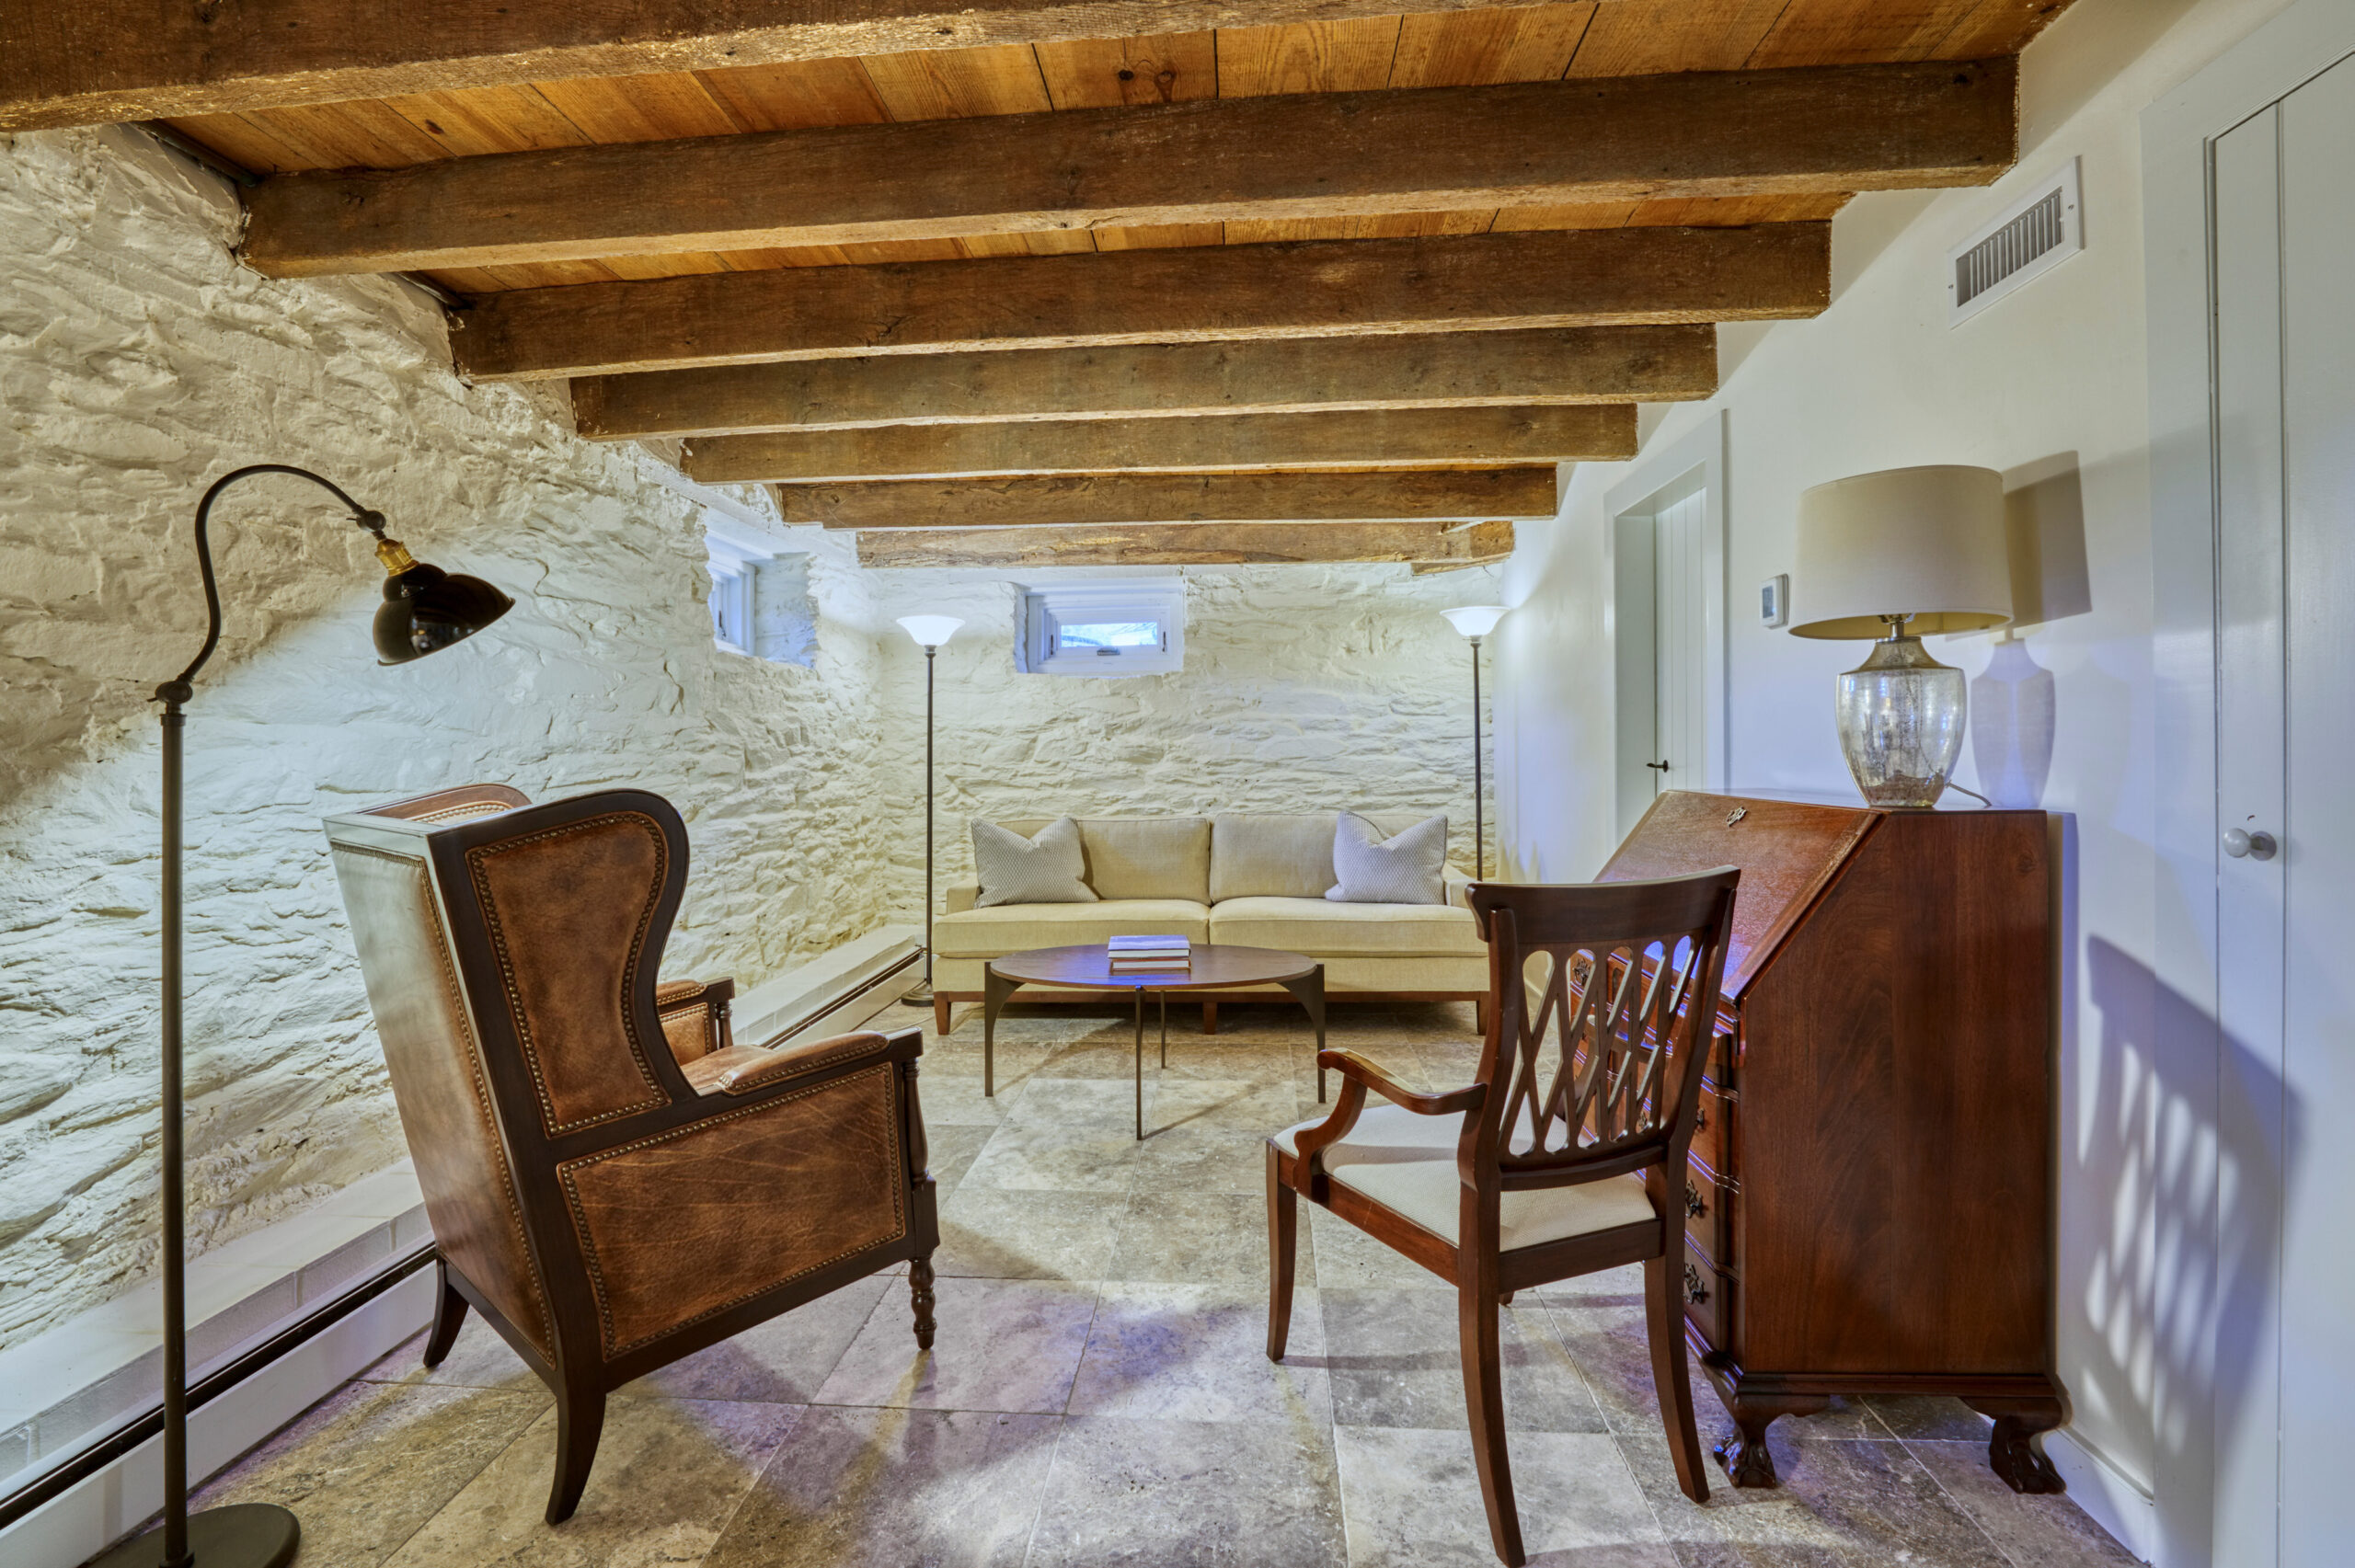 Professional interior photo of main house of Historic Hearthstone Manor: 35428 Appalachian Trail Rd, Round Hill, Virginia - showing basement sitting room with painted stone walls, and exposed wooden ceiling beams